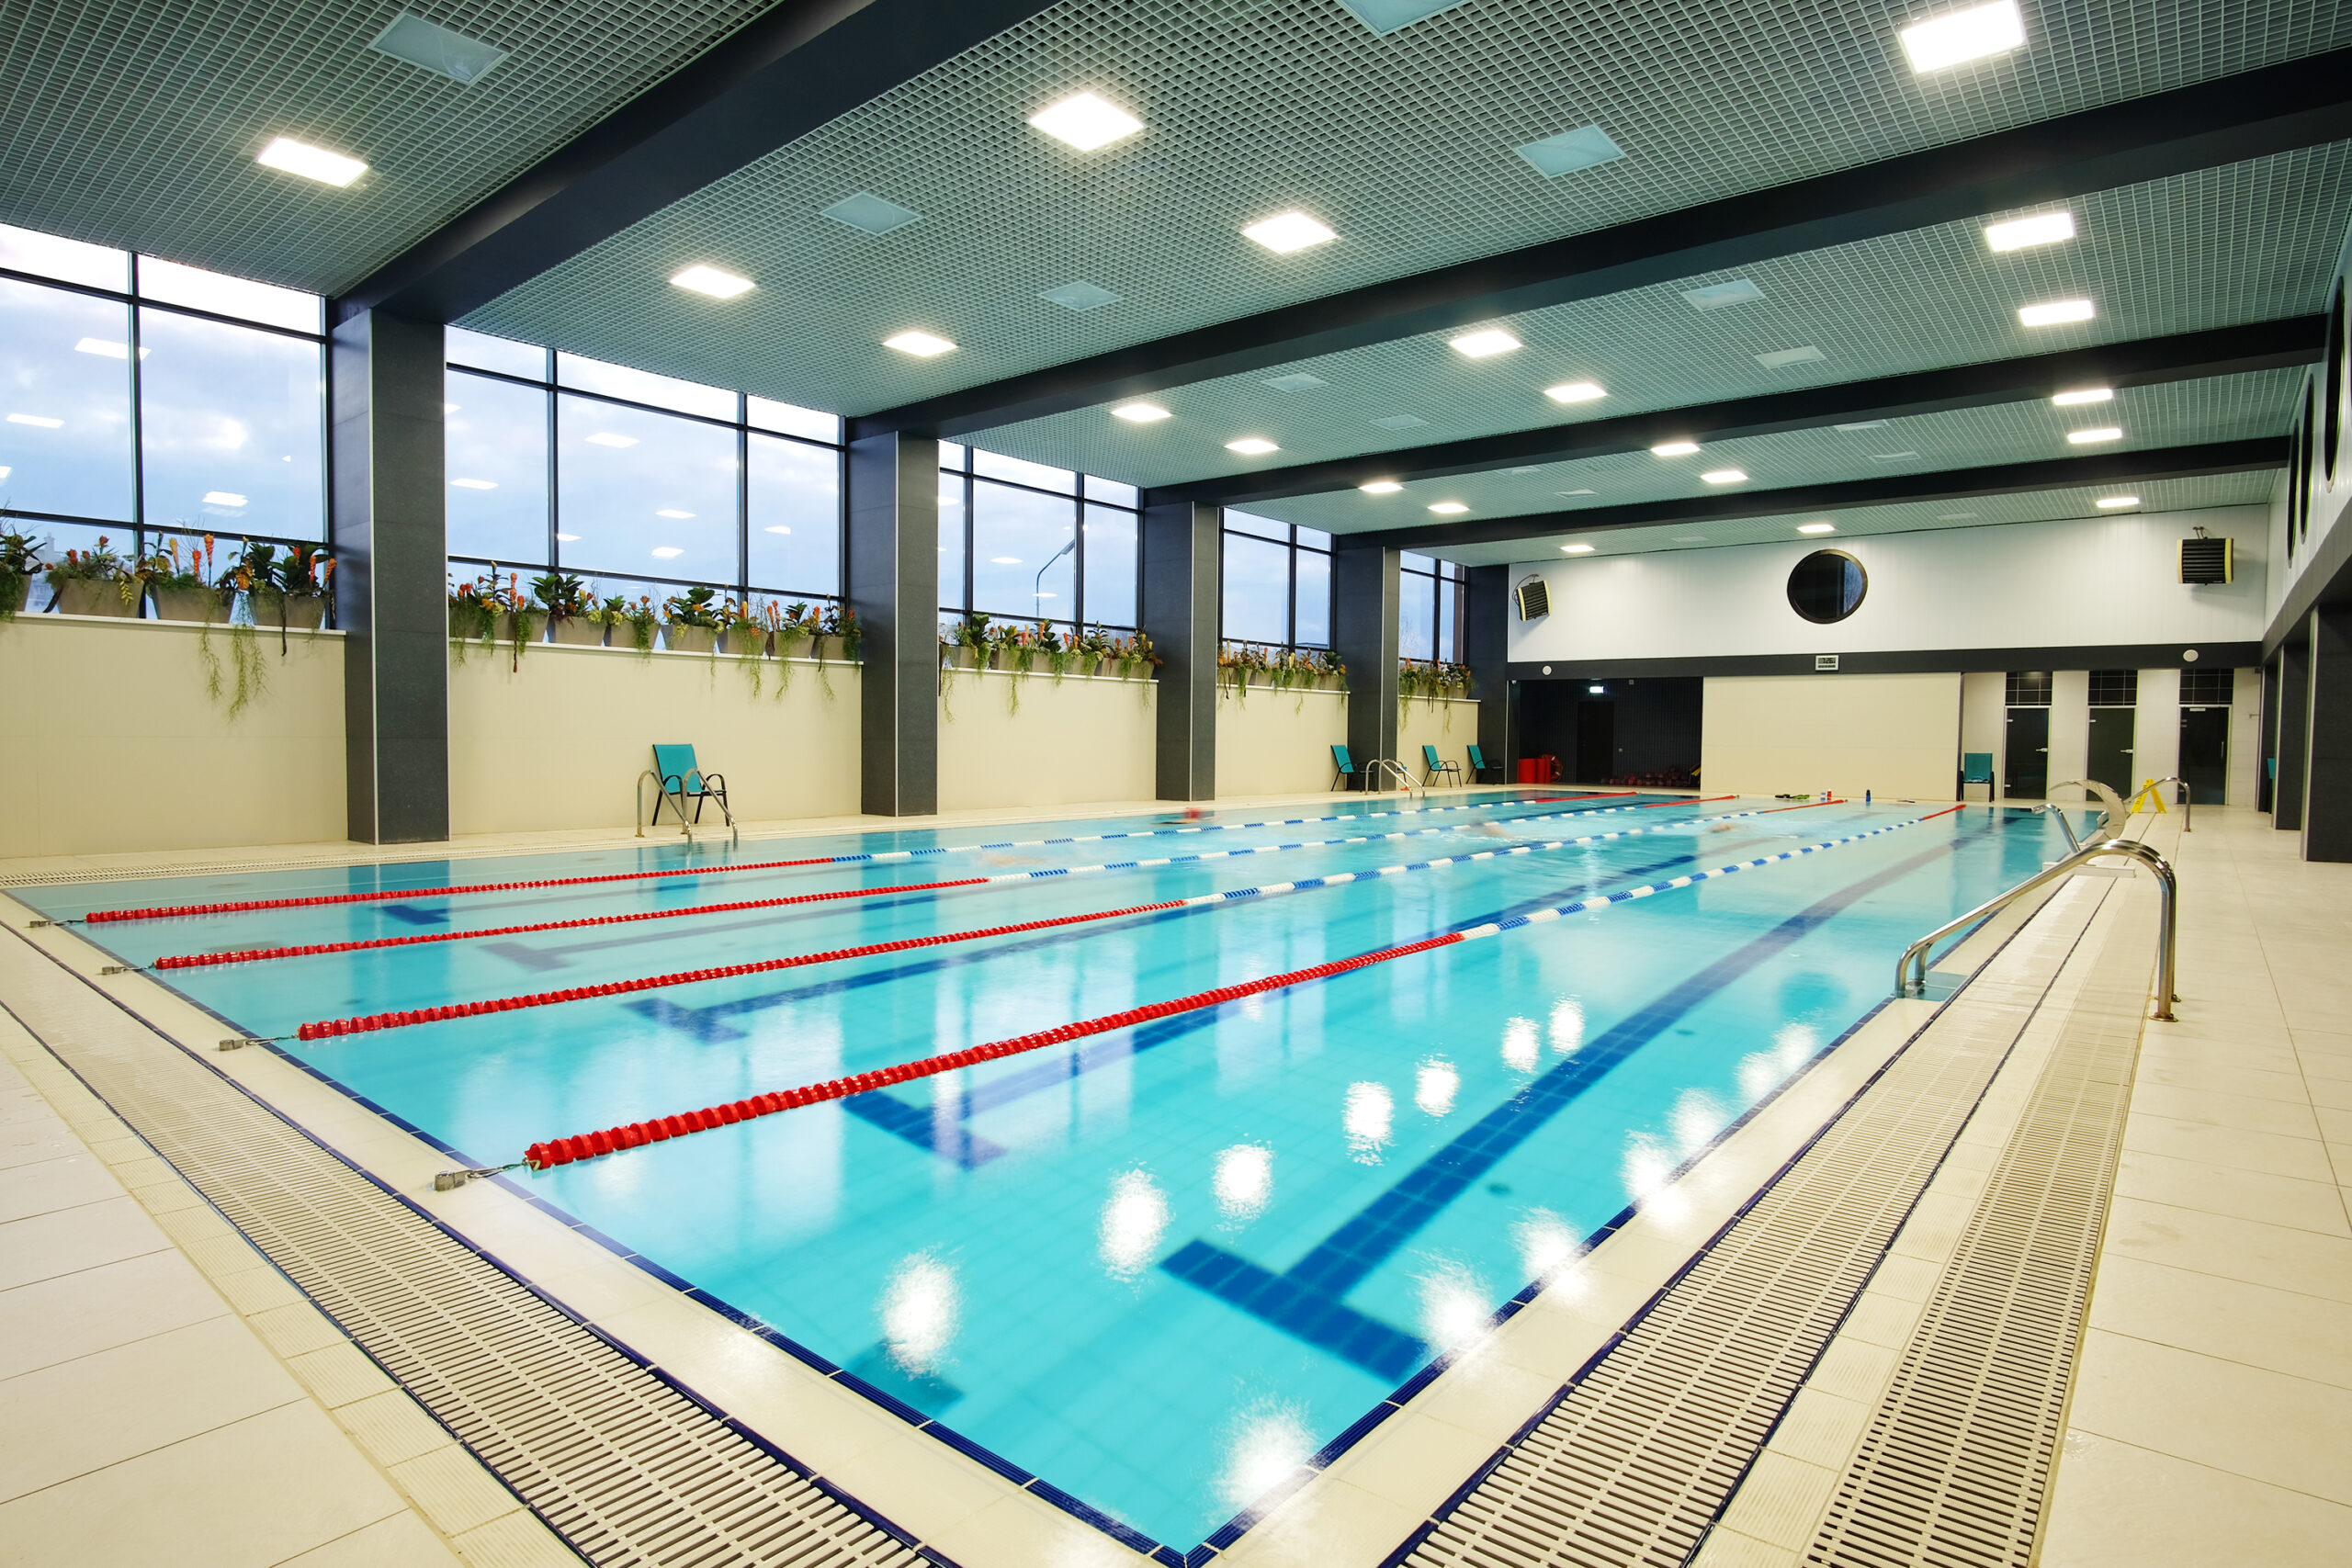 Heat pumps can be used to heat all manner of leisure facilities including swimming pools